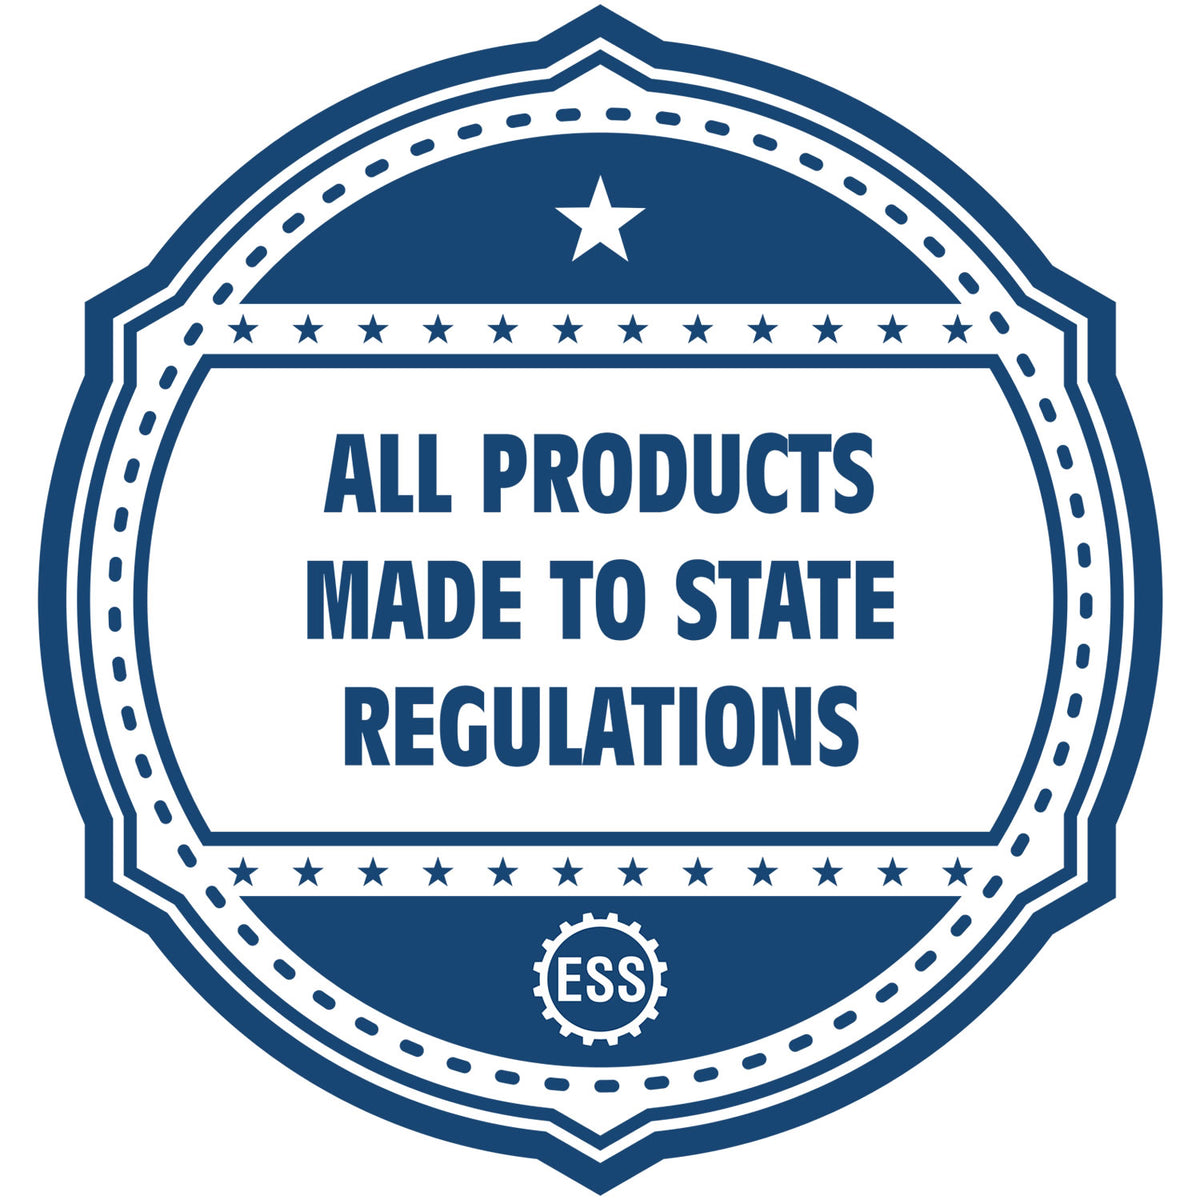 An icon or badge element for the Wooden Handle Kansas State Seal Notary Public Stamp showing that this product is made in compliance with state regulations.